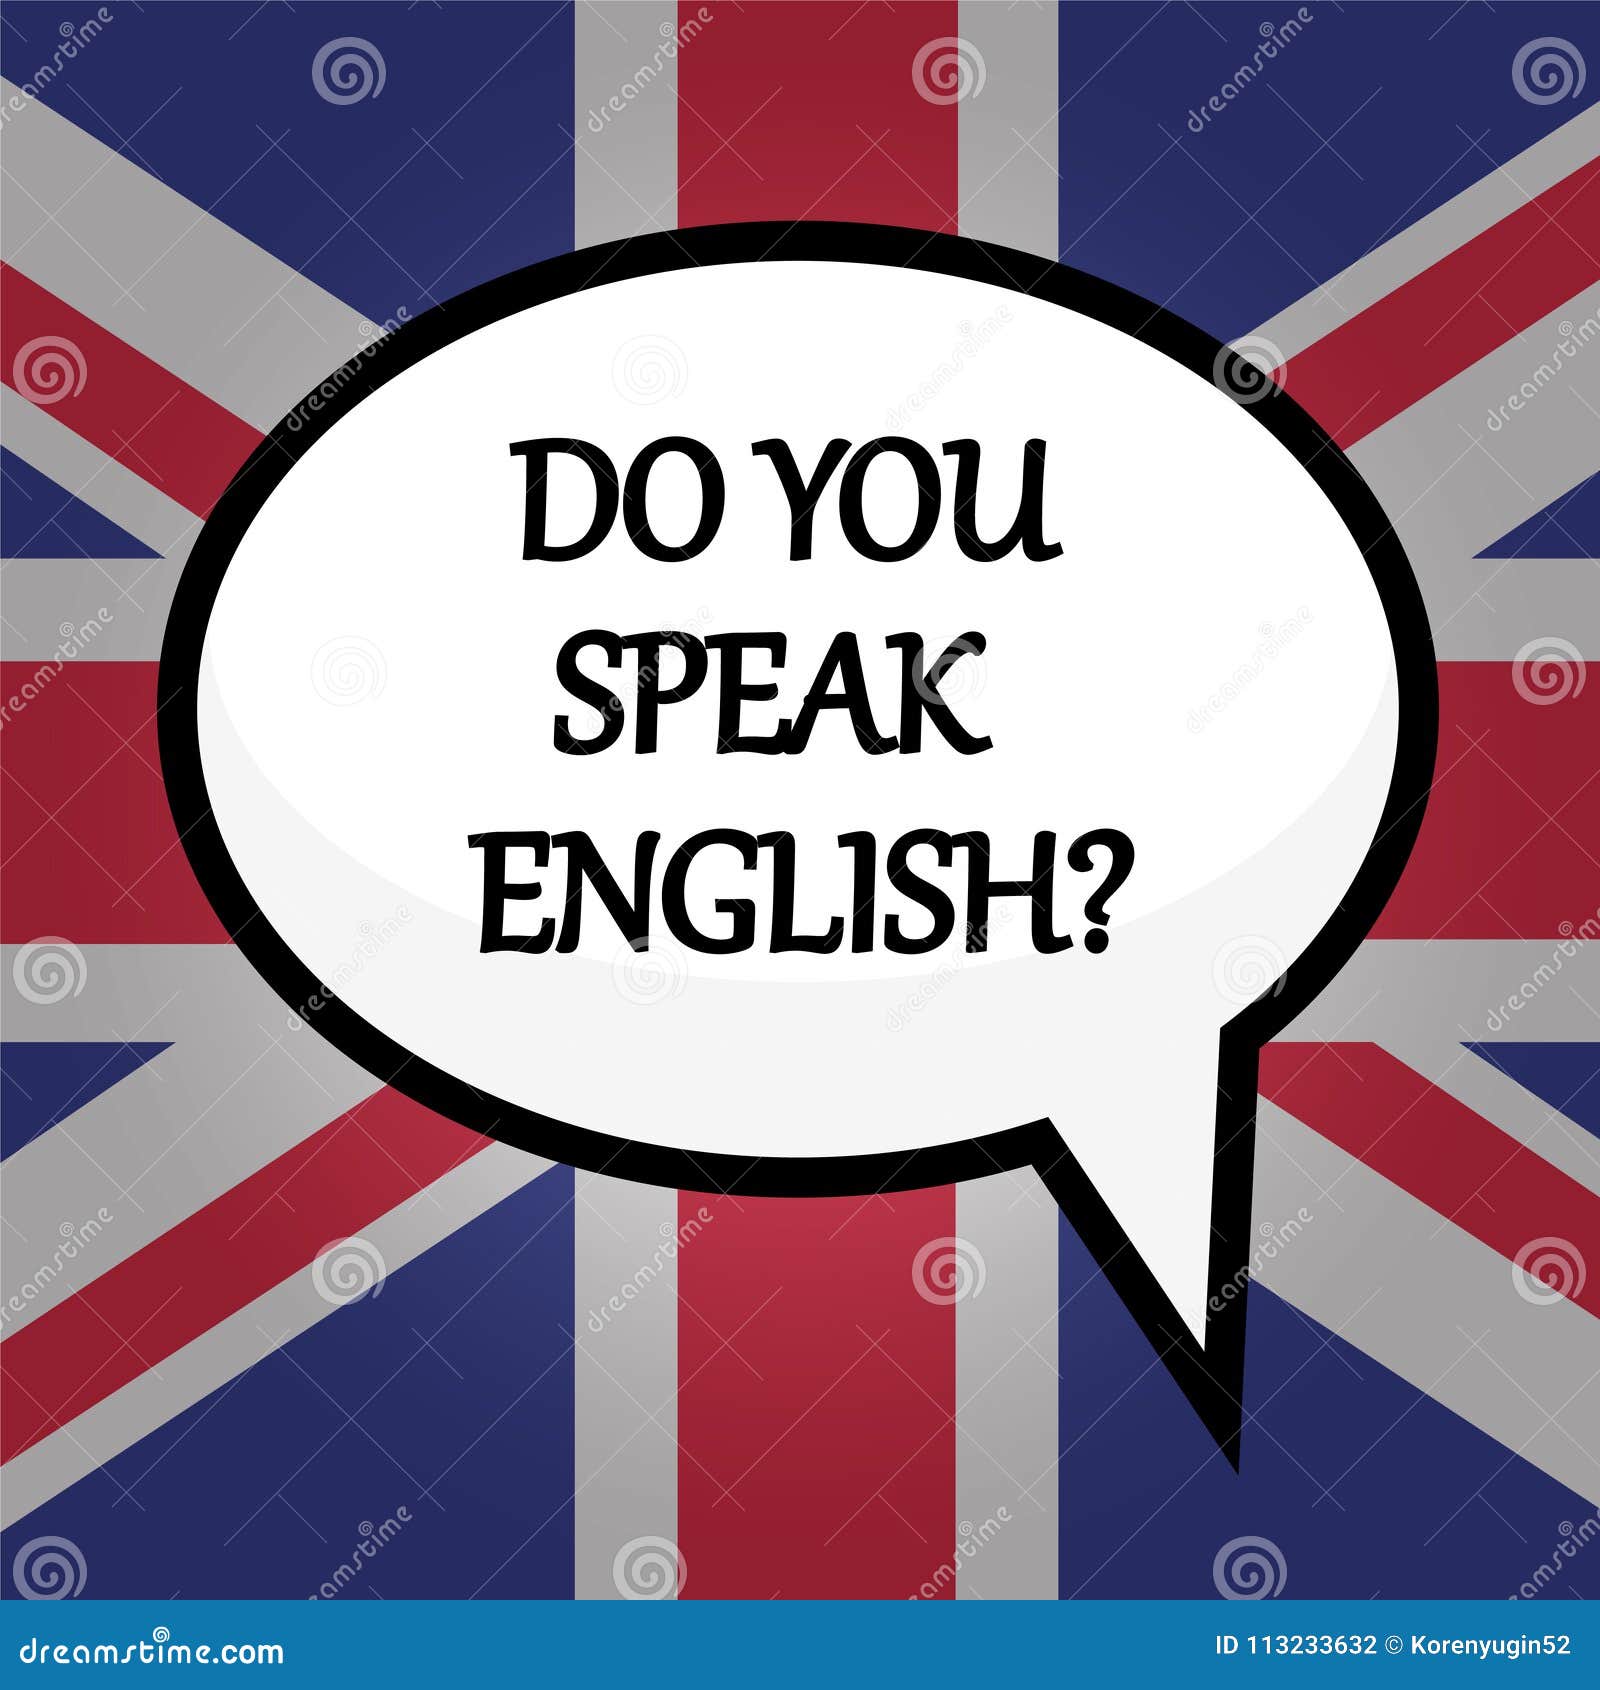 They can t speak english. Do you speak English. Let's speak English. Speak English надпись. Плакат do you speak English.